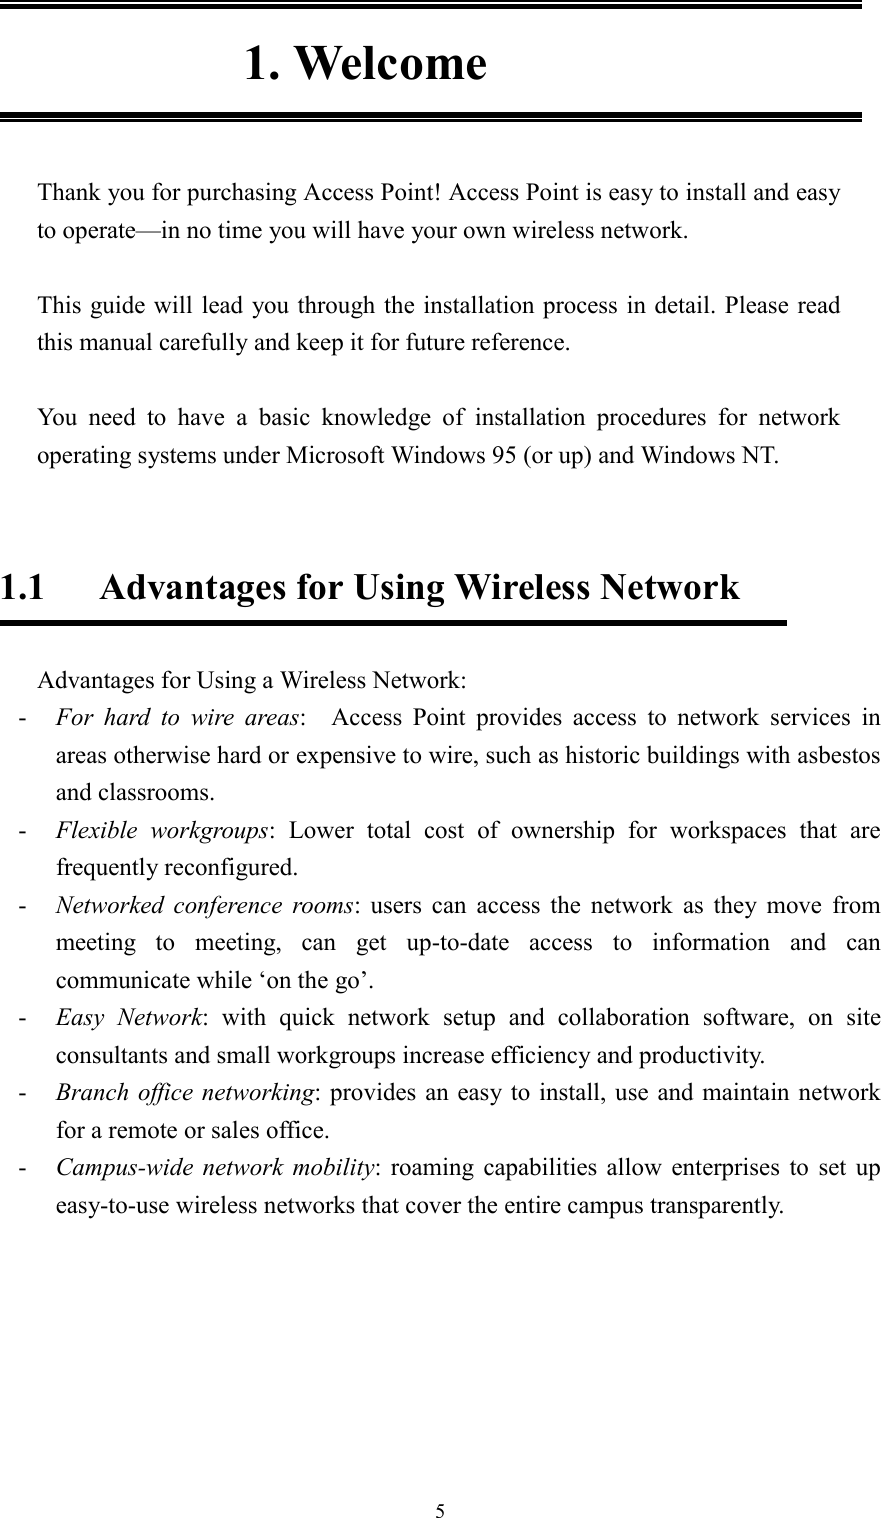 51. WelcomeThank you for purchasing Access Point! Access Point is easy to install and easyto operate—in no time you will have your own wireless network.This guide will lead you through the installation process in detail. Please readthis manual carefully and keep it for future reference.  You need to have a basic knowledge of installation procedures for networkoperating systems under Microsoft Windows 95 (or up) and Windows NT.1.1 Advantages for Using Wireless NetworkAdvantages for Using a Wireless Network:- For hard to wire areas:  Access Point provides access to network services inareas otherwise hard or expensive to wire, such as historic buildings with asbestosand classrooms.- Flexible workgroups: Lower total cost of ownership for workspaces that arefrequently reconfigured.- Networked conference rooms: users can access the network as they move frommeeting to meeting, can get up-to-date access to information and cancommunicate while ‘on the go’.- Easy Network: with quick network setup and collaboration software, on siteconsultants and small workgroups increase efficiency and productivity.- Branch office networking: provides an easy to install, use and maintain networkfor a remote or sales office.- Campus-wide network mobility: roaming capabilities allow enterprises to set upeasy-to-use wireless networks that cover the entire campus transparently.